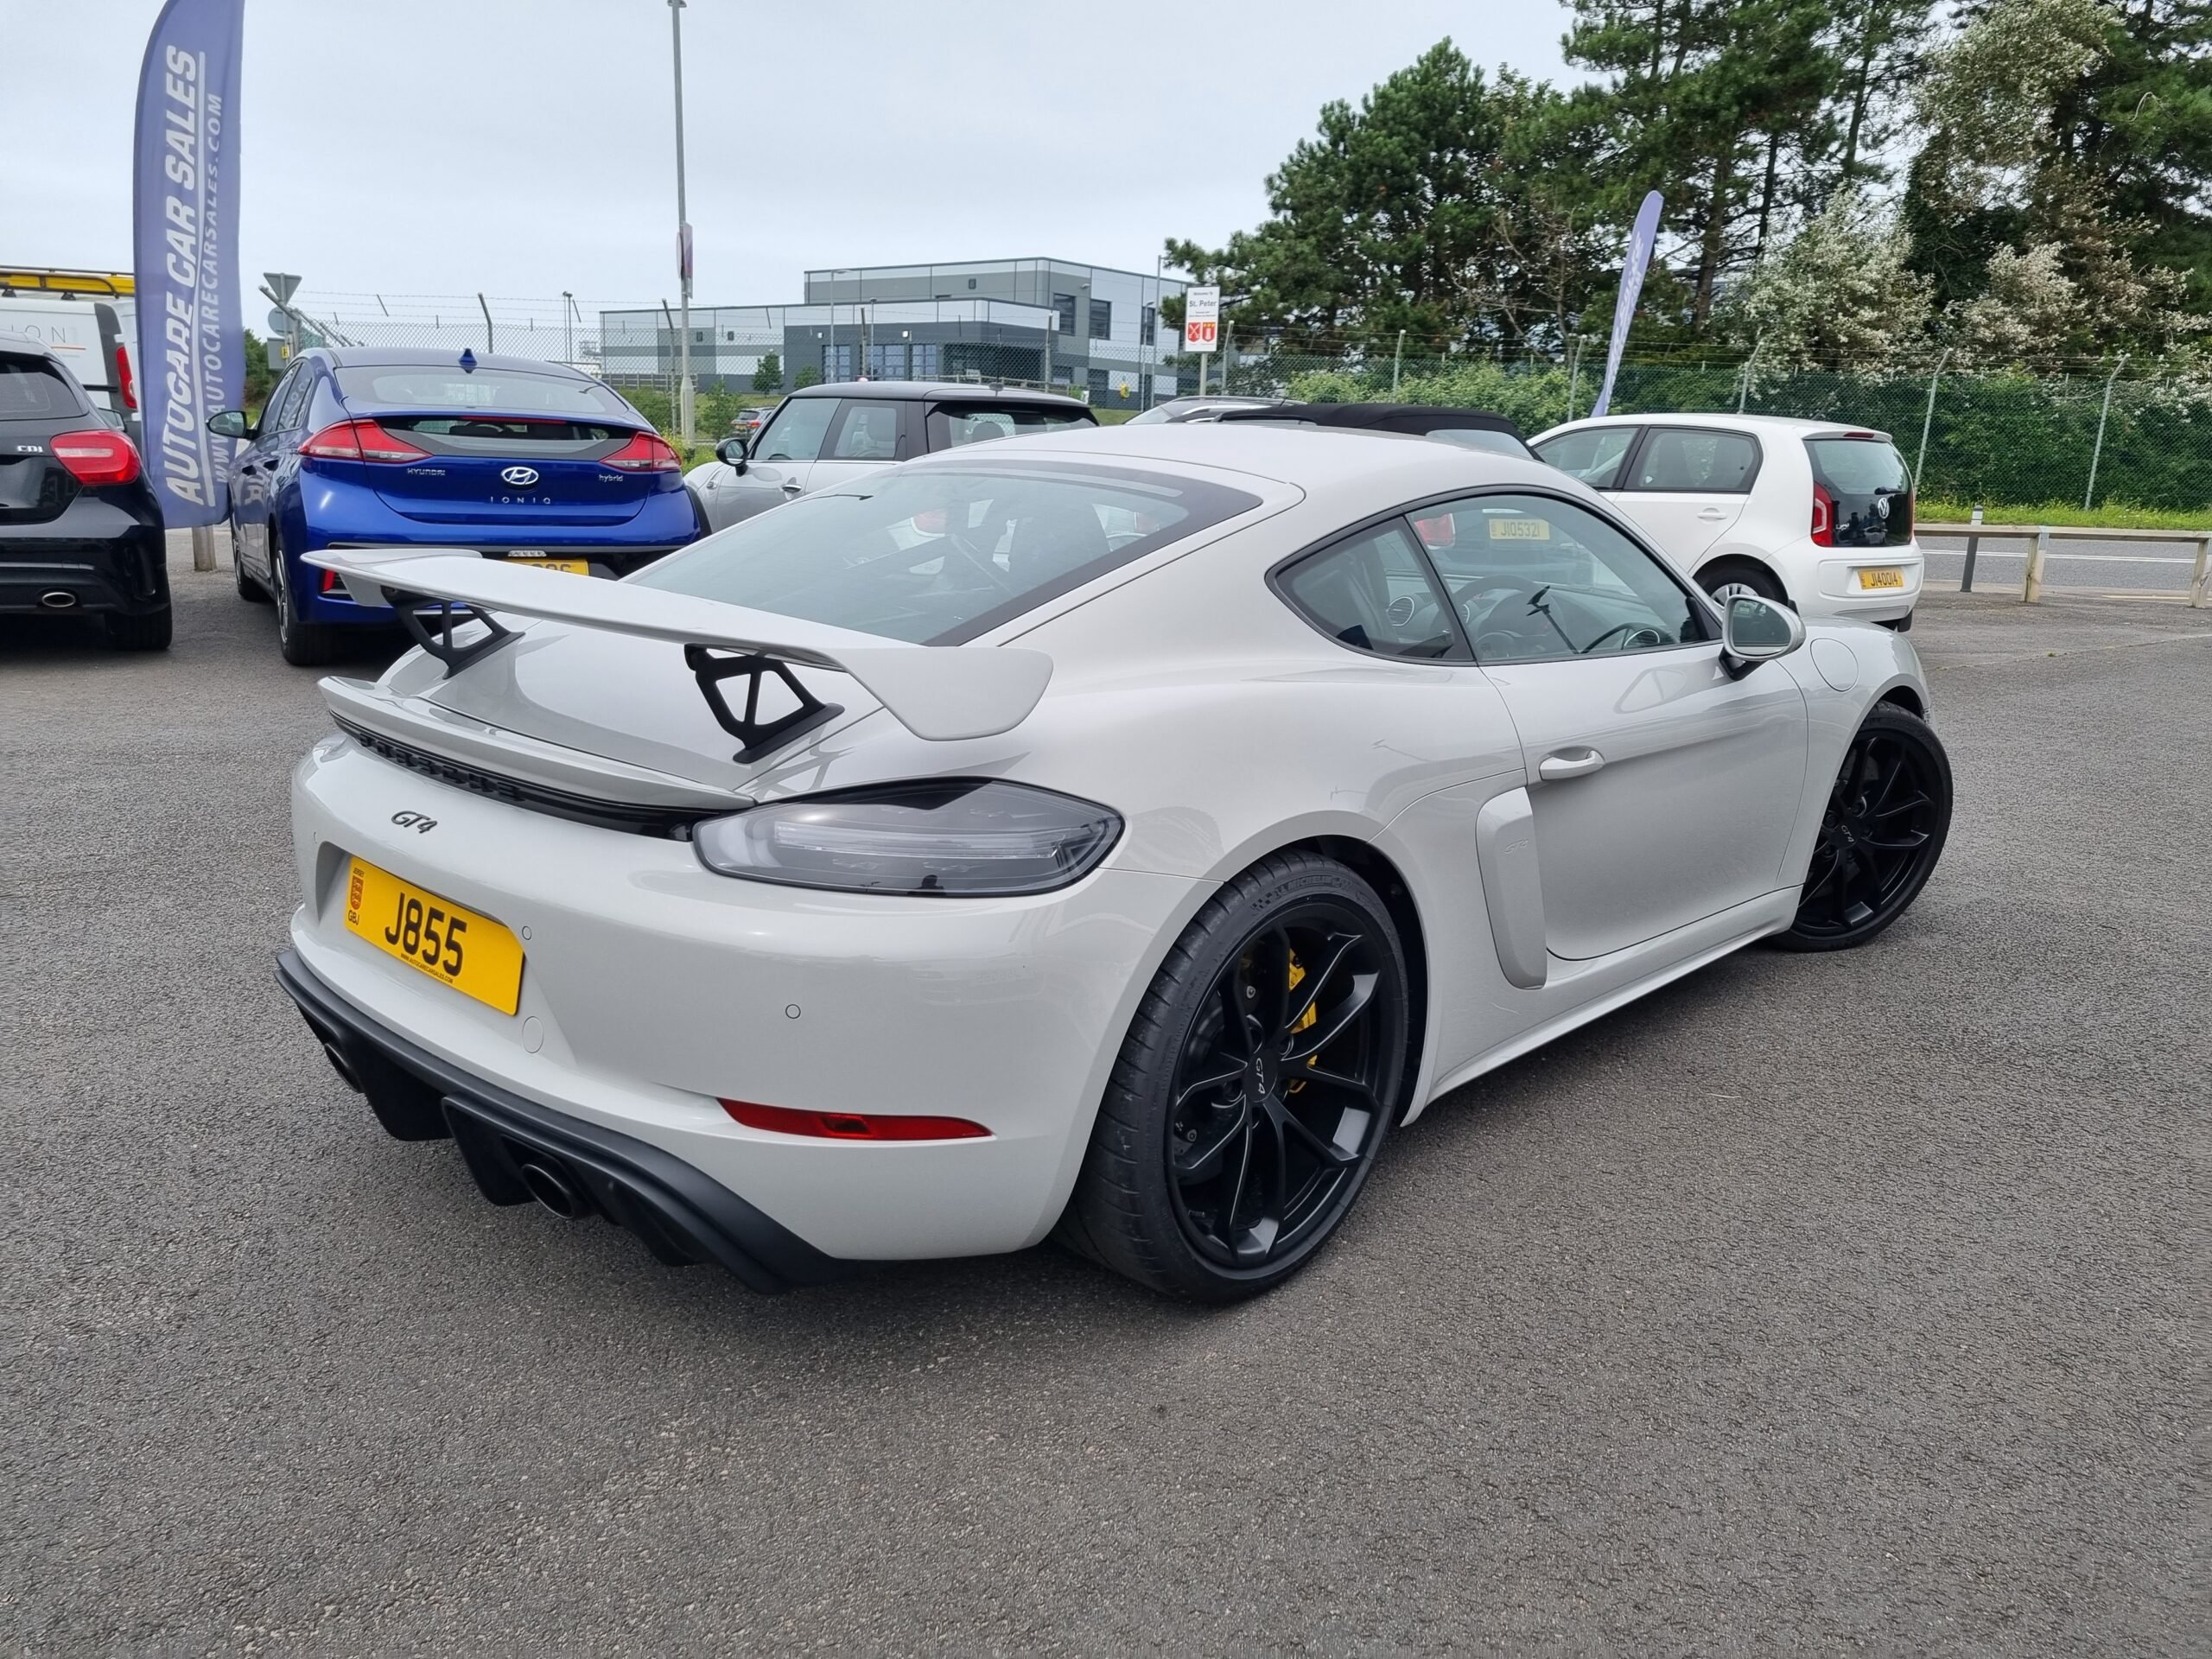 2020 Porsche Cayman Gt4 Club Sport 40 Coupe Only 1700 Miles18100 Worth Of Factory Options 6